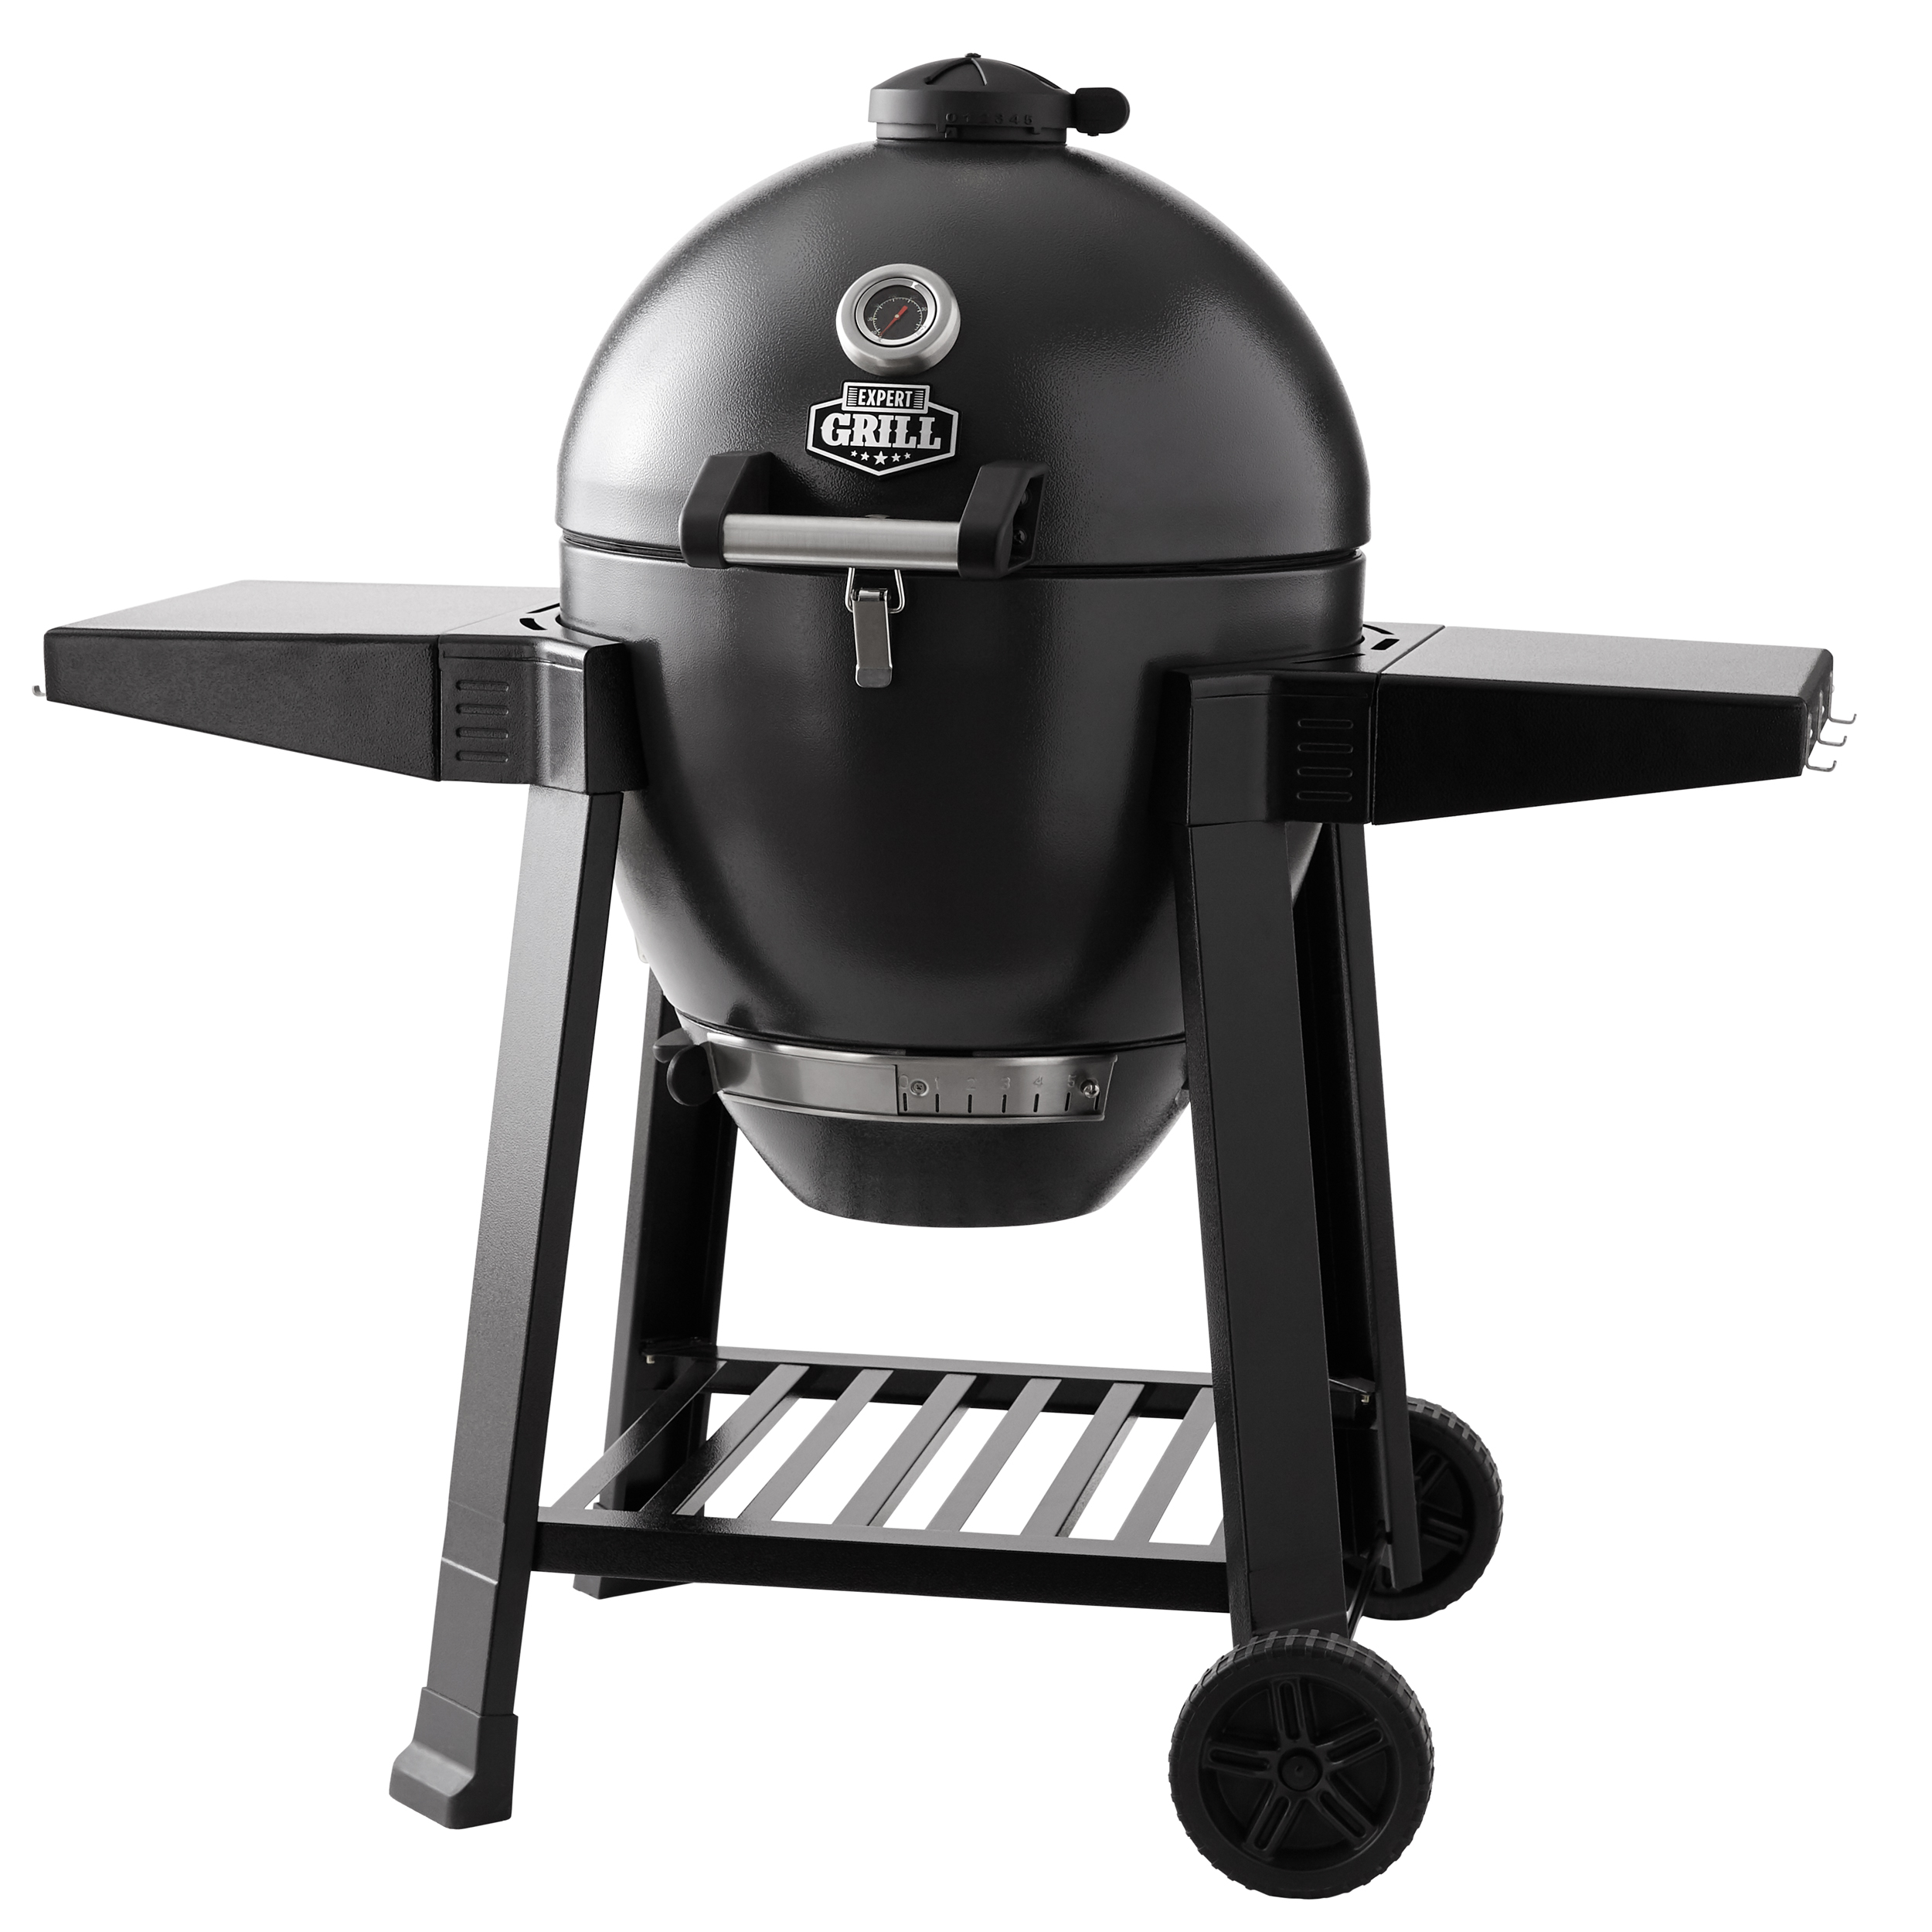 Expert Grill Kamado Charcoal Grill - image 1 of 12